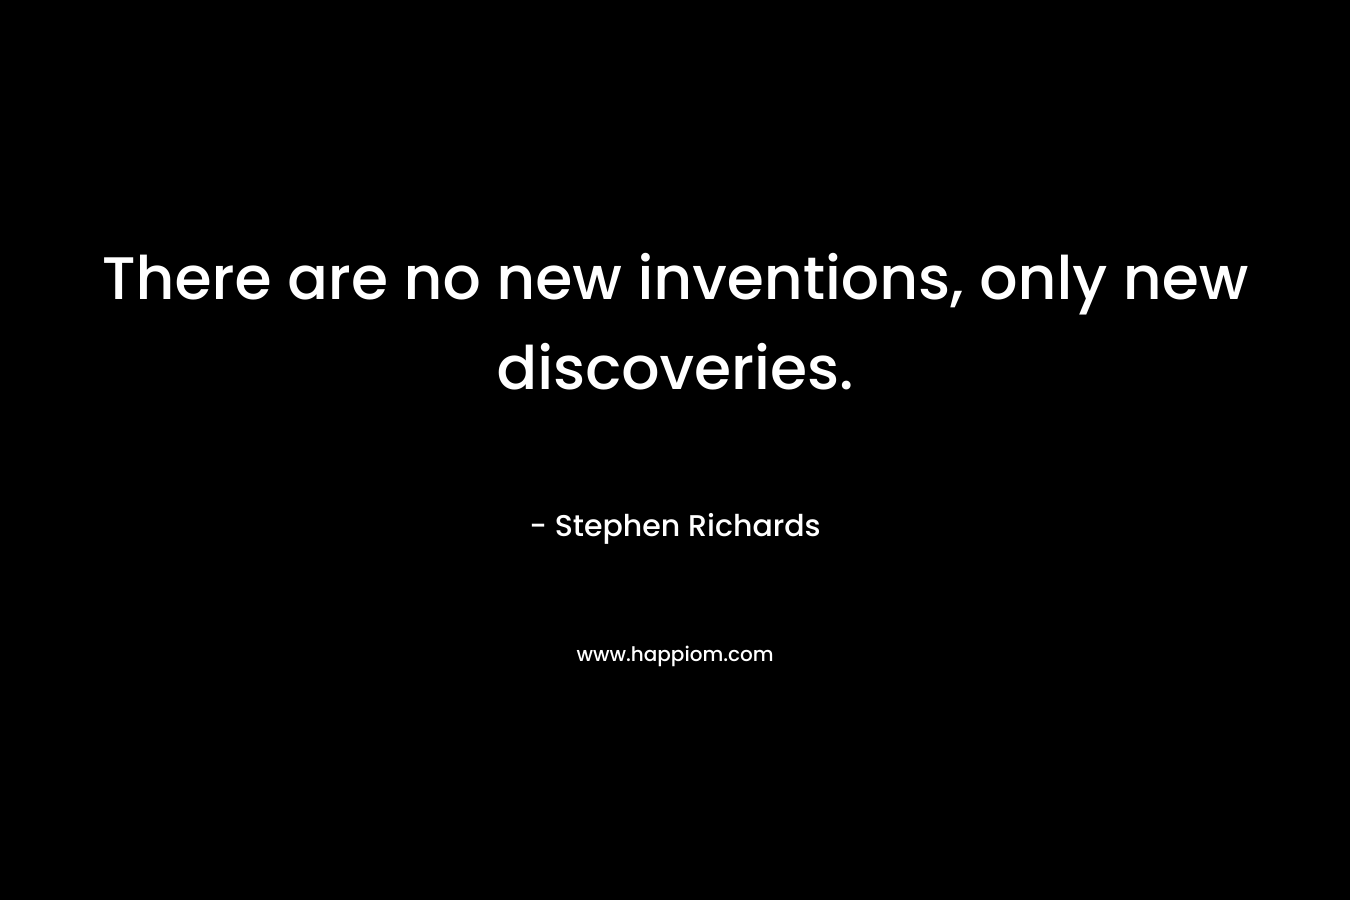 There are no new inventions, only new discoveries. – Stephen Richards